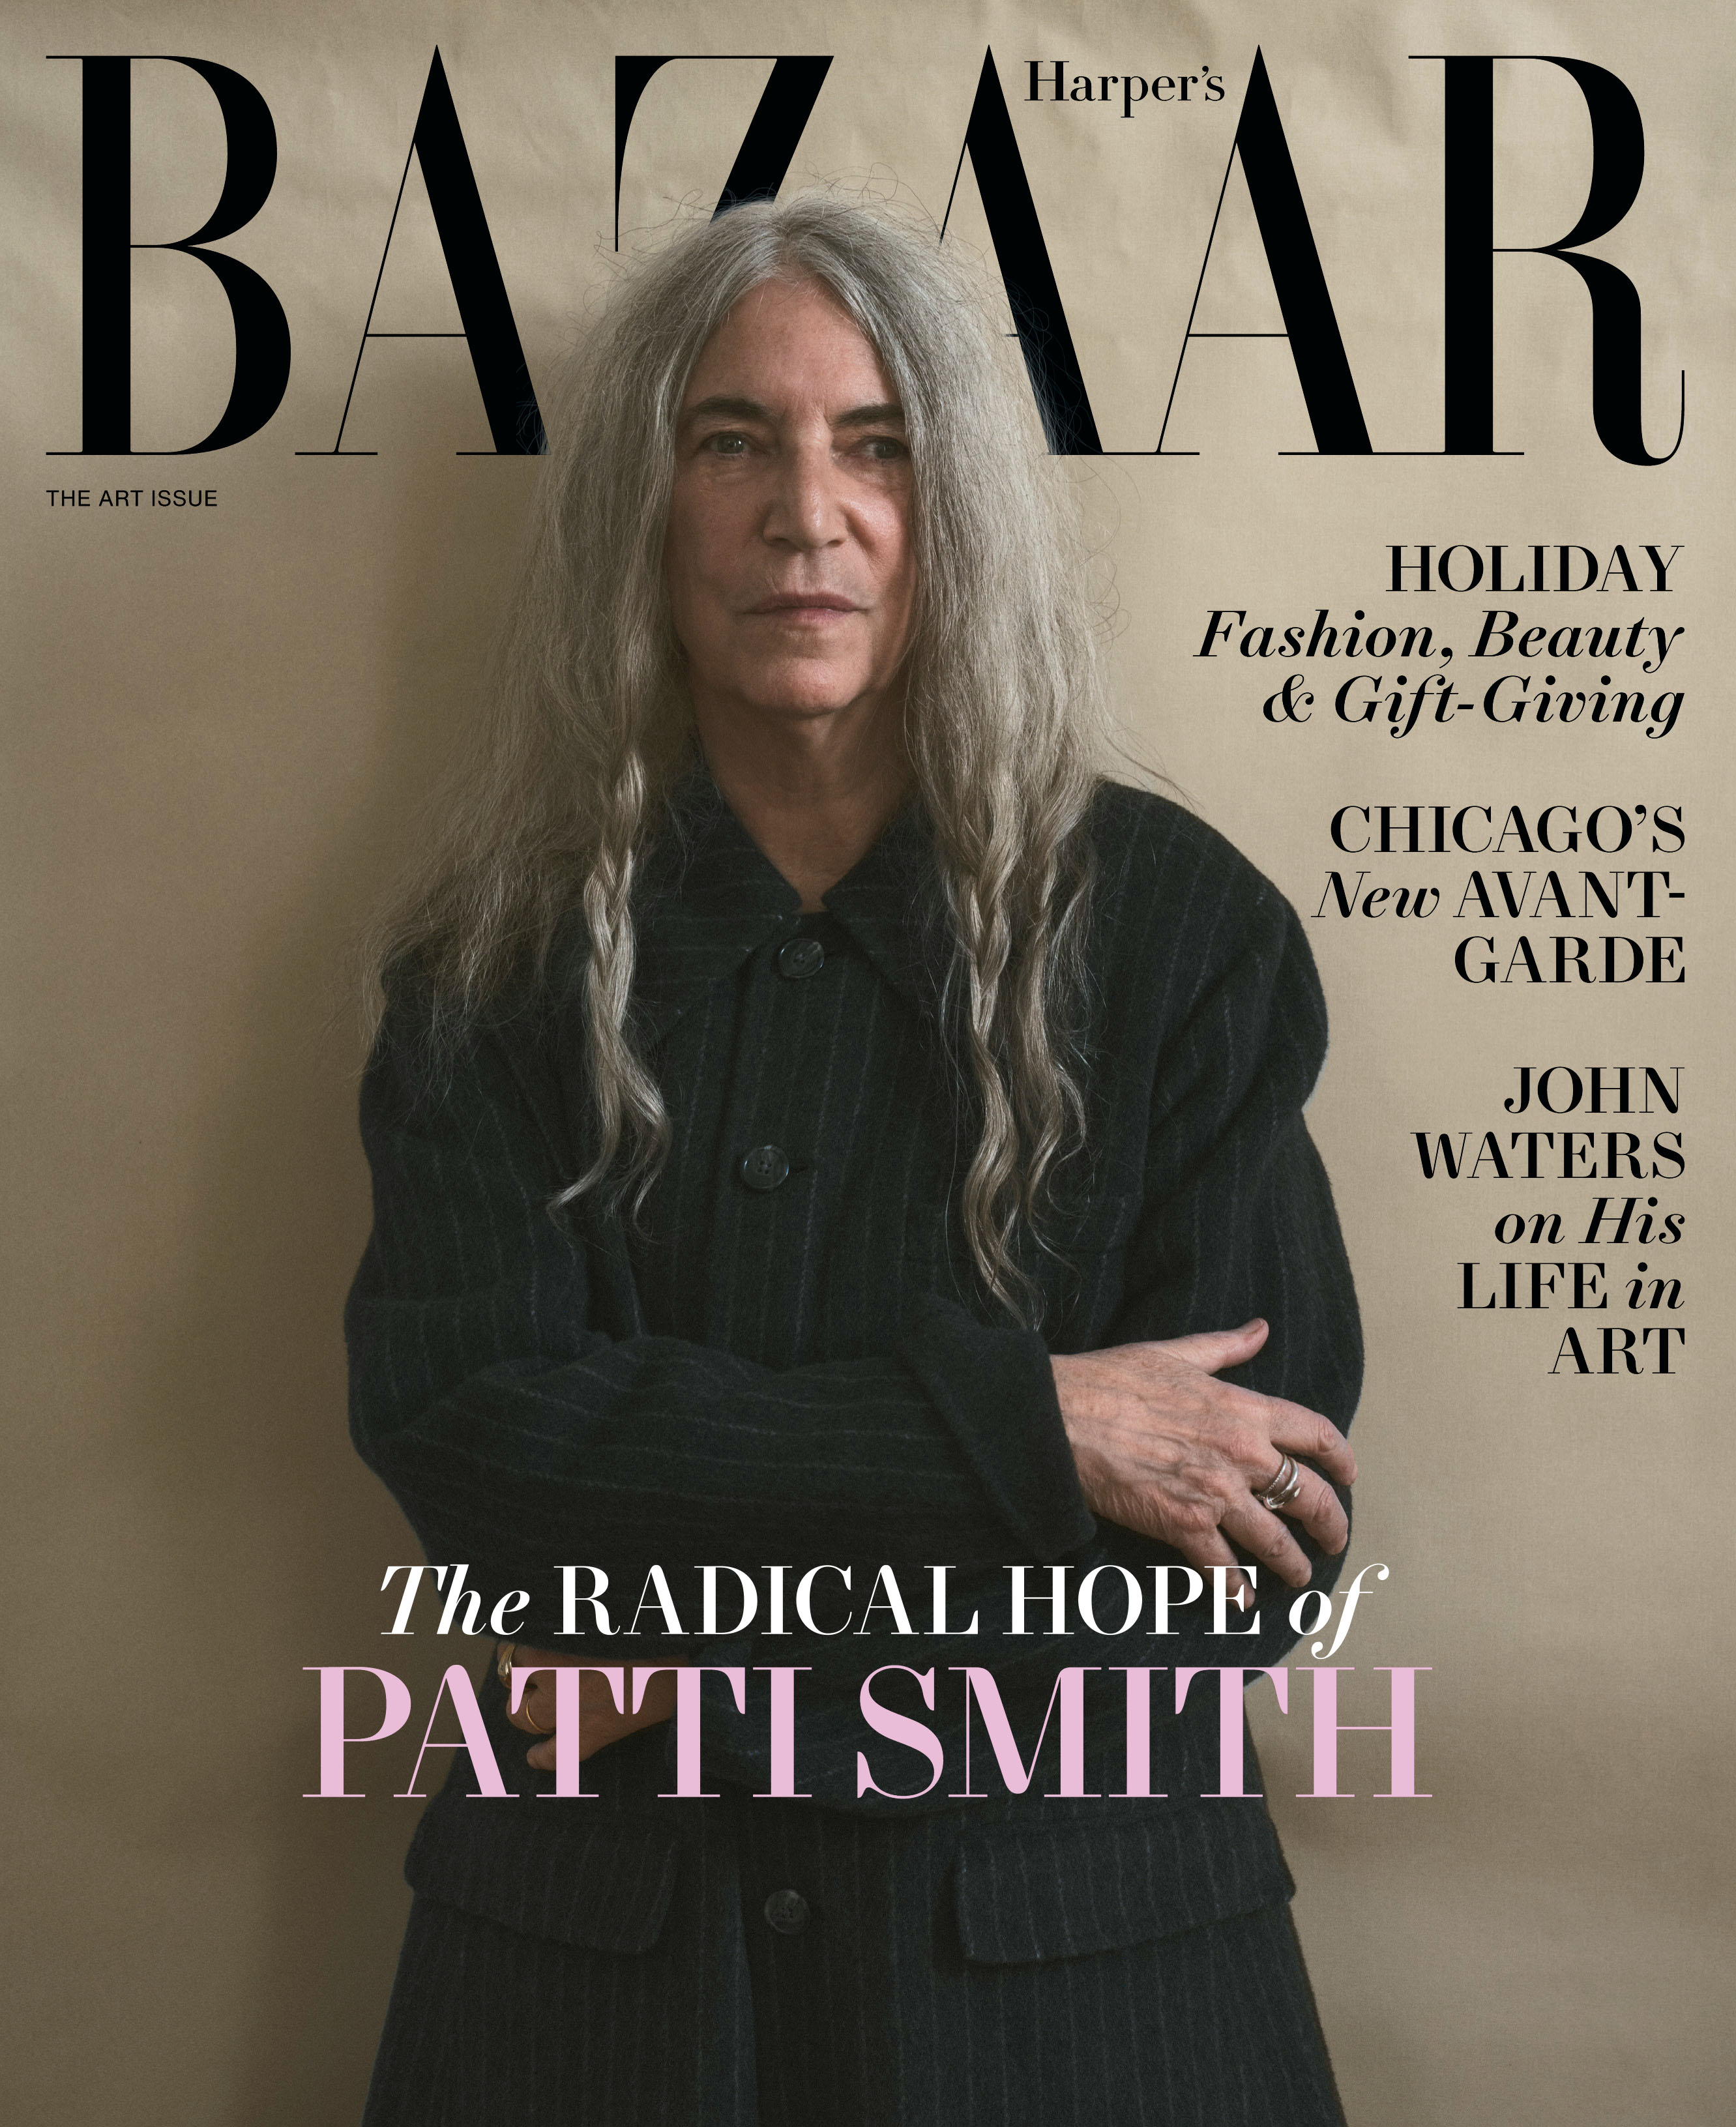 Harper's Bazaar - General Excellence, Service and Lifestyle